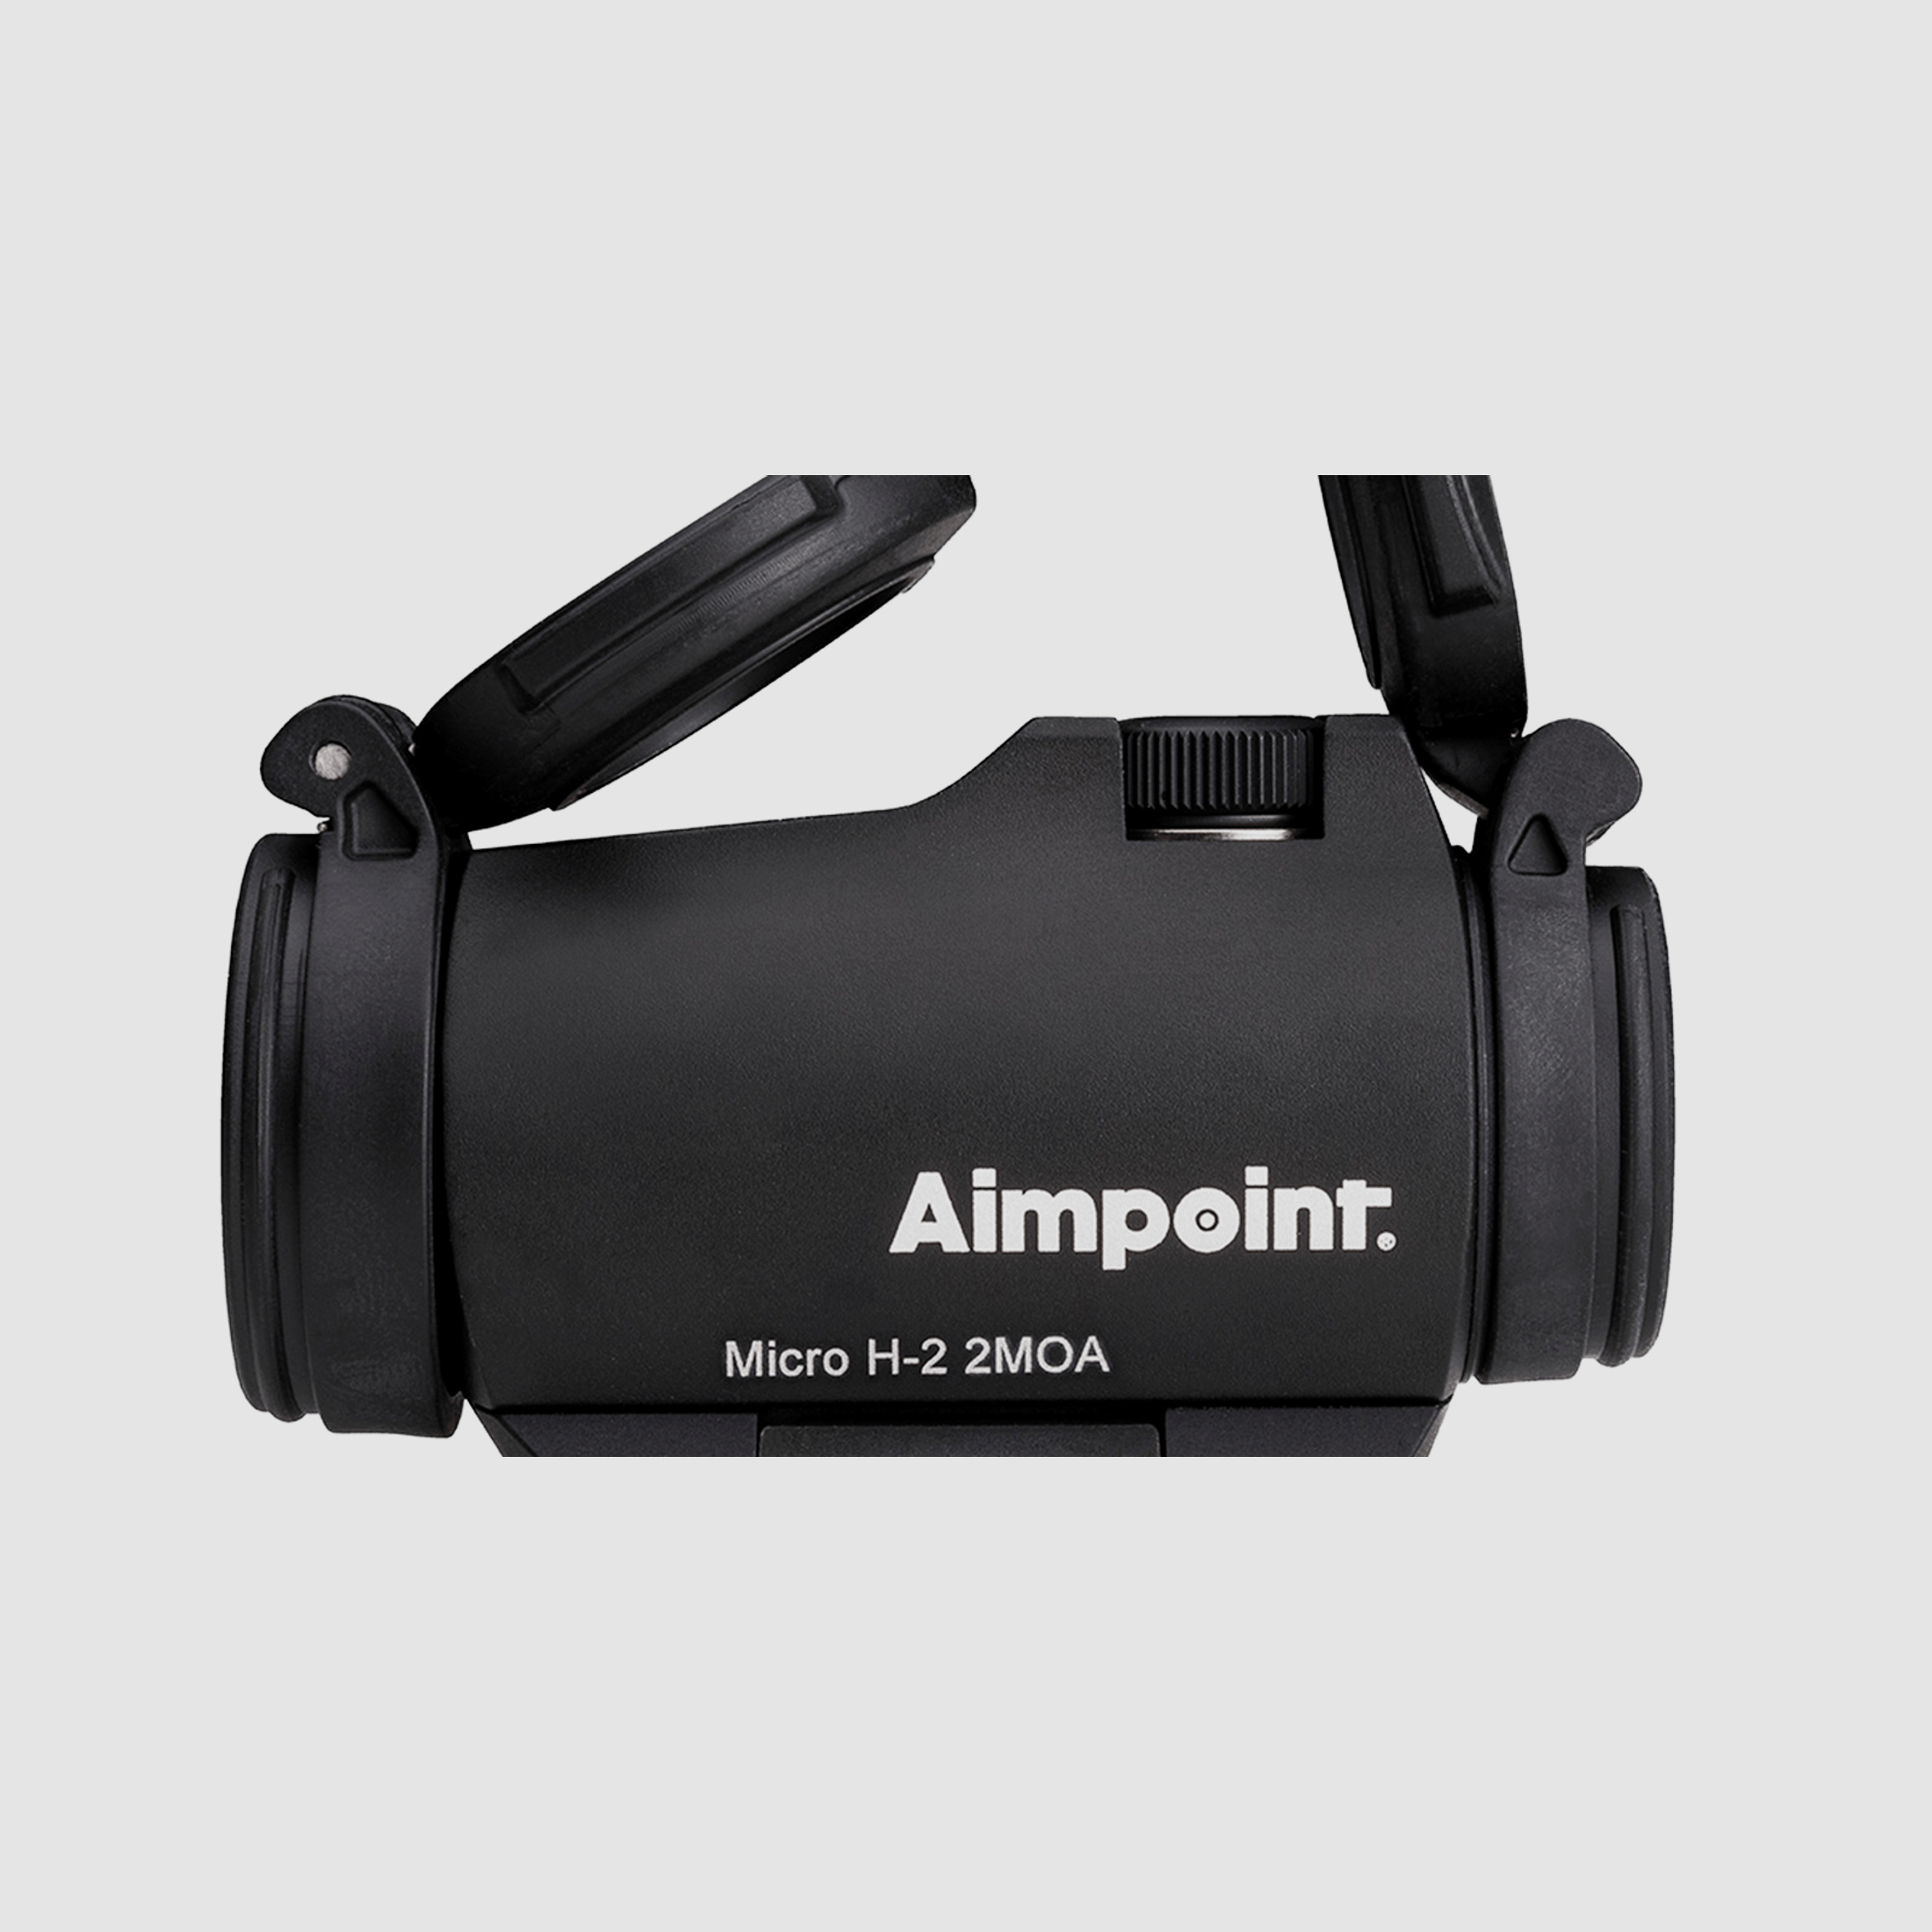 AIMPOINT Micro H-2